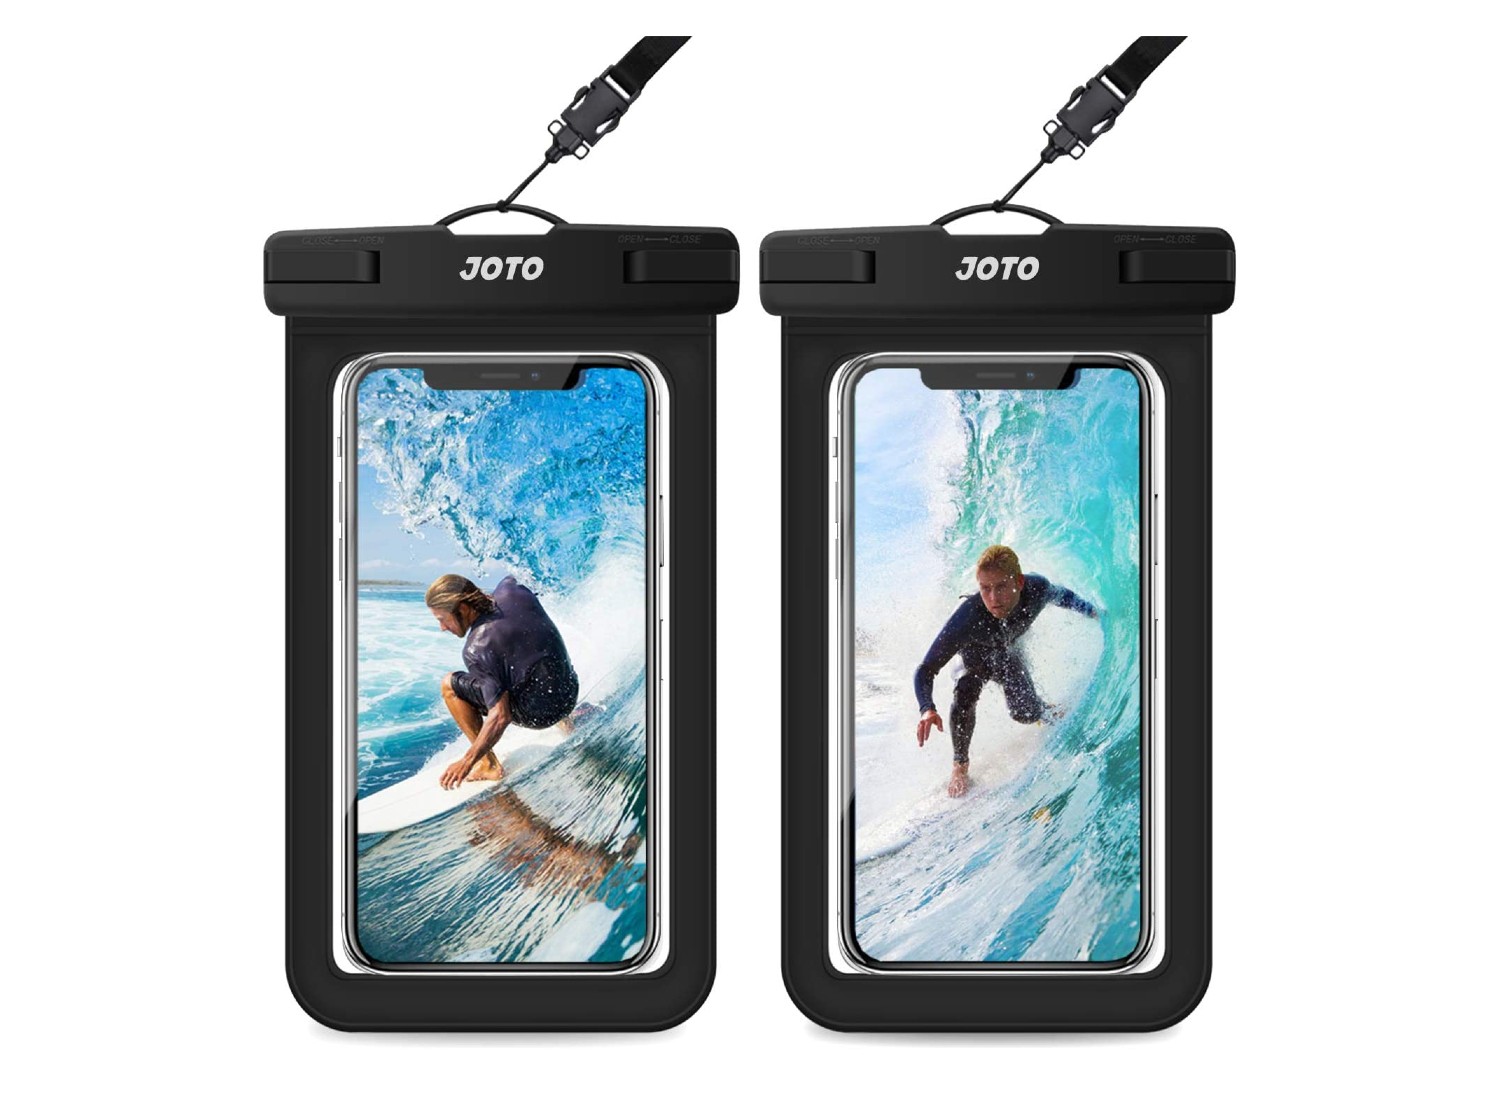 Universal Waterproof Case,Hiearcool Waterproof Phone Pouch Compatible for iPhone, Black